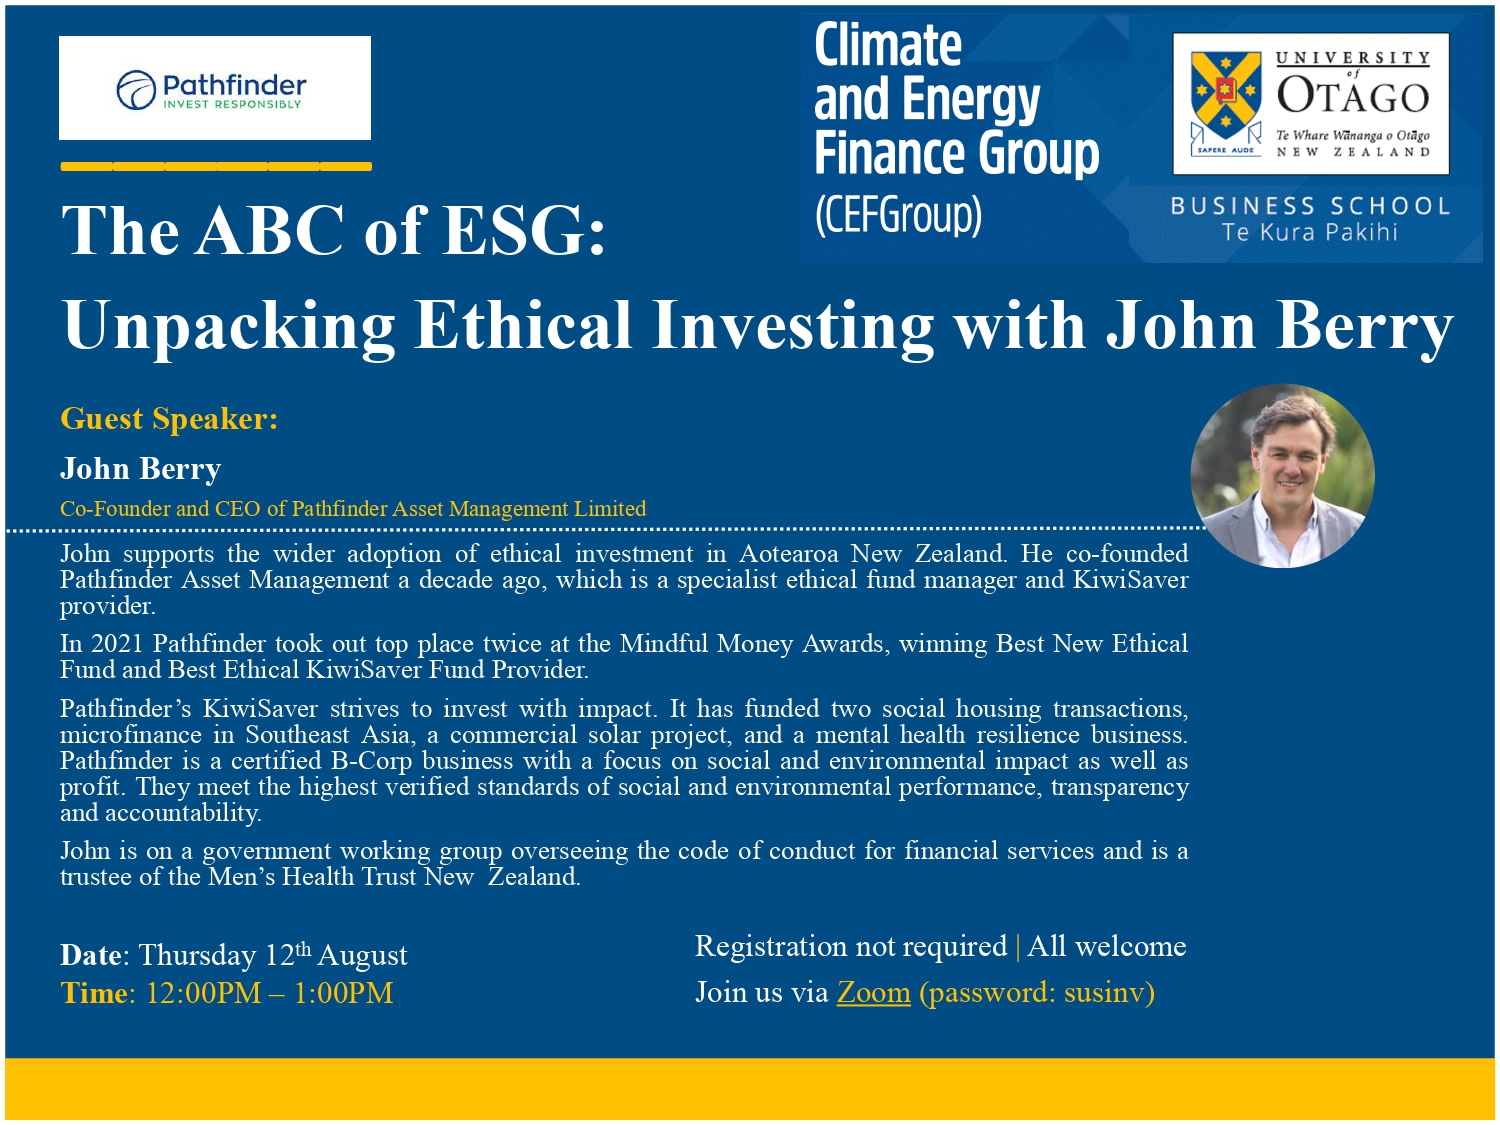 CEFGroup Webinar | The ABC of ESG: Unpacking Ethical Investing with John Berry @ Burns 7 Seminar Room